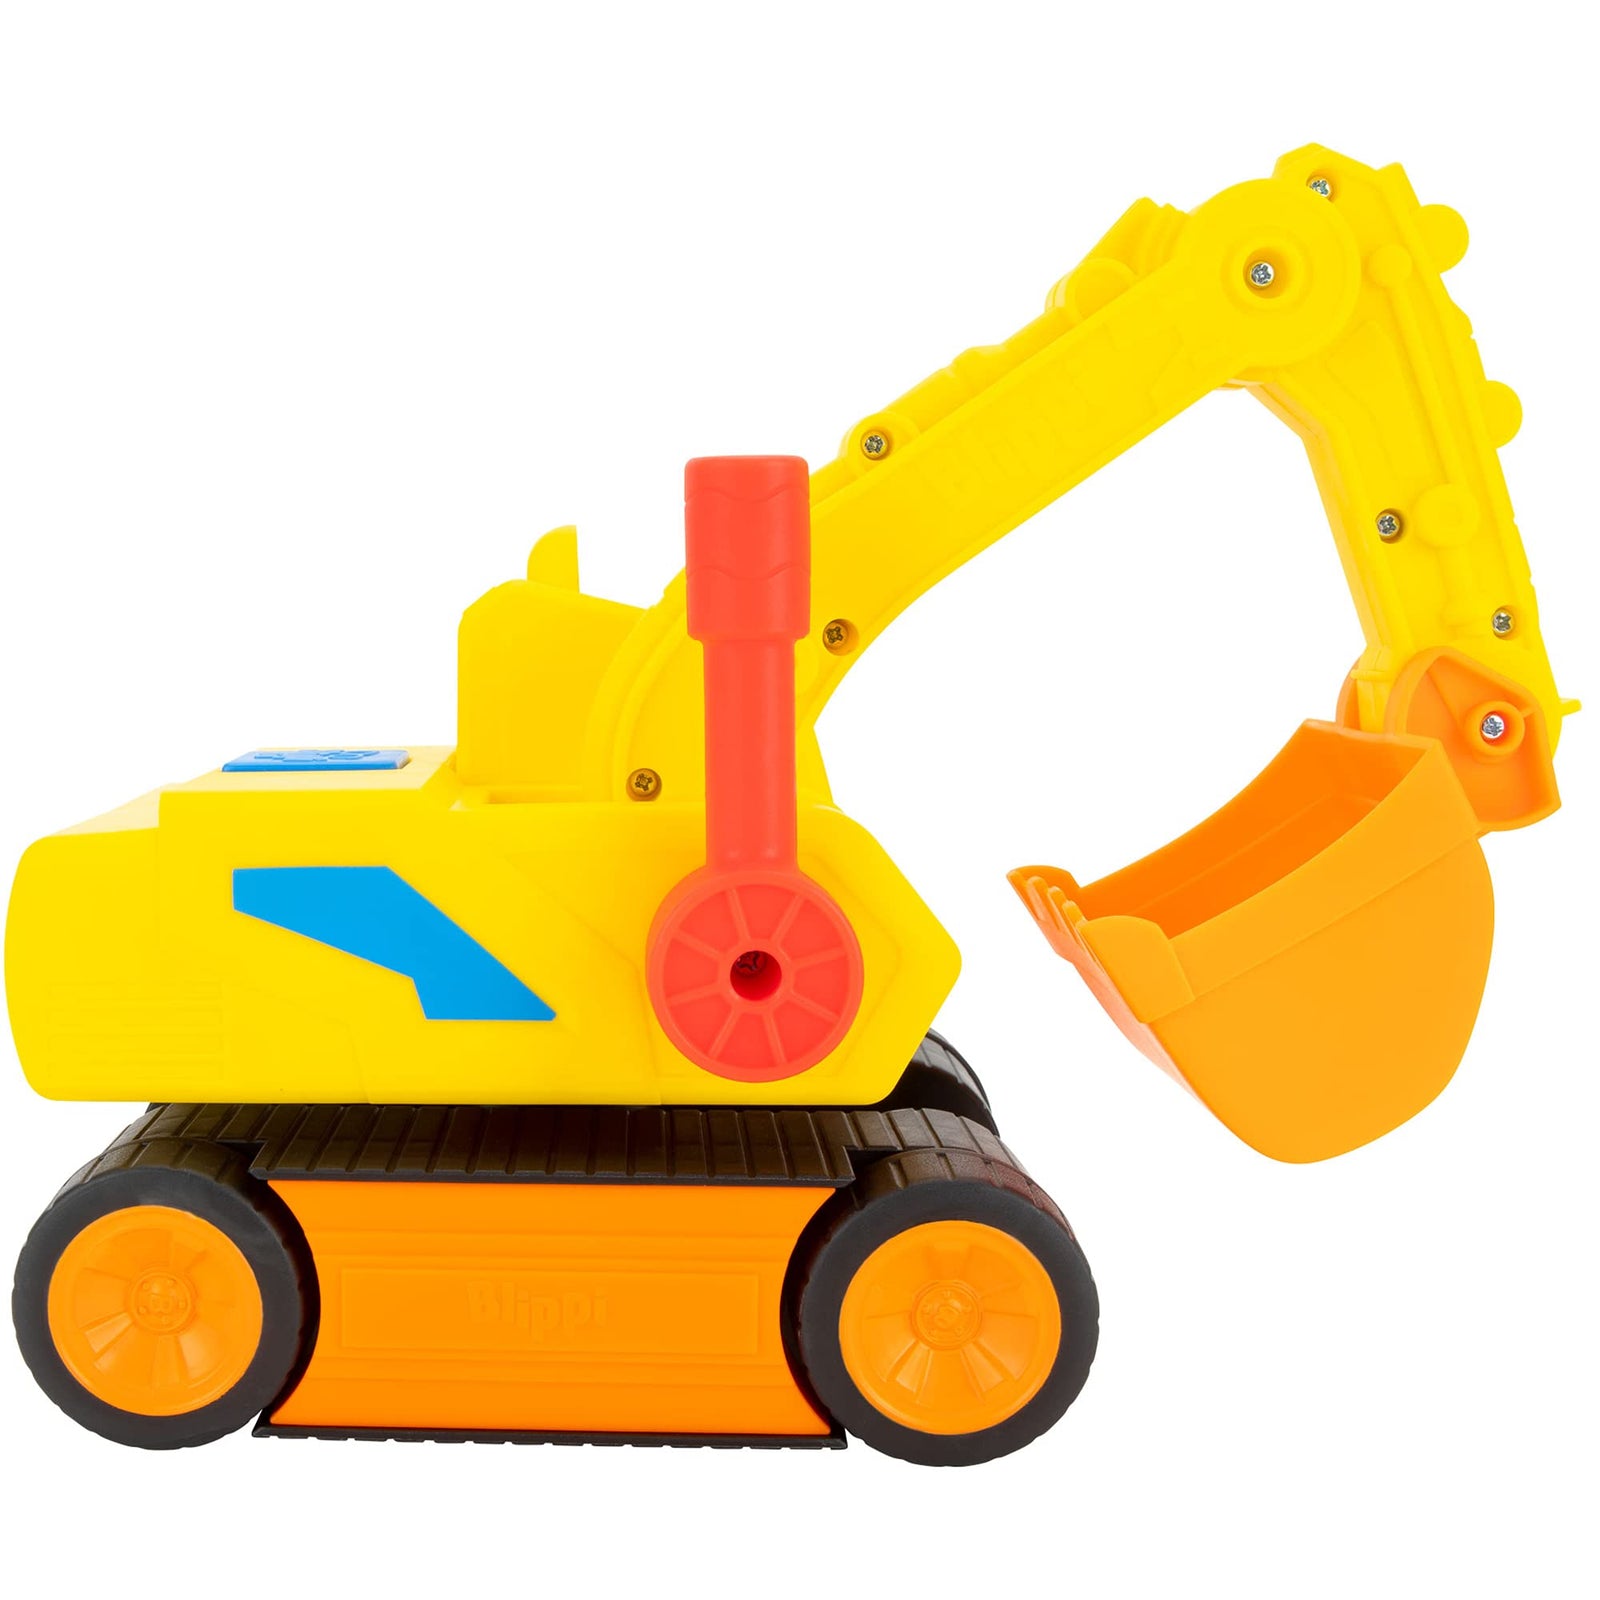 Blippi Excavator - Fun Freewheeling Vehicle with Features Including 3 Construction Worker, Sounds and Phrases - Educational Vehicles for Toddlers and Young Kids